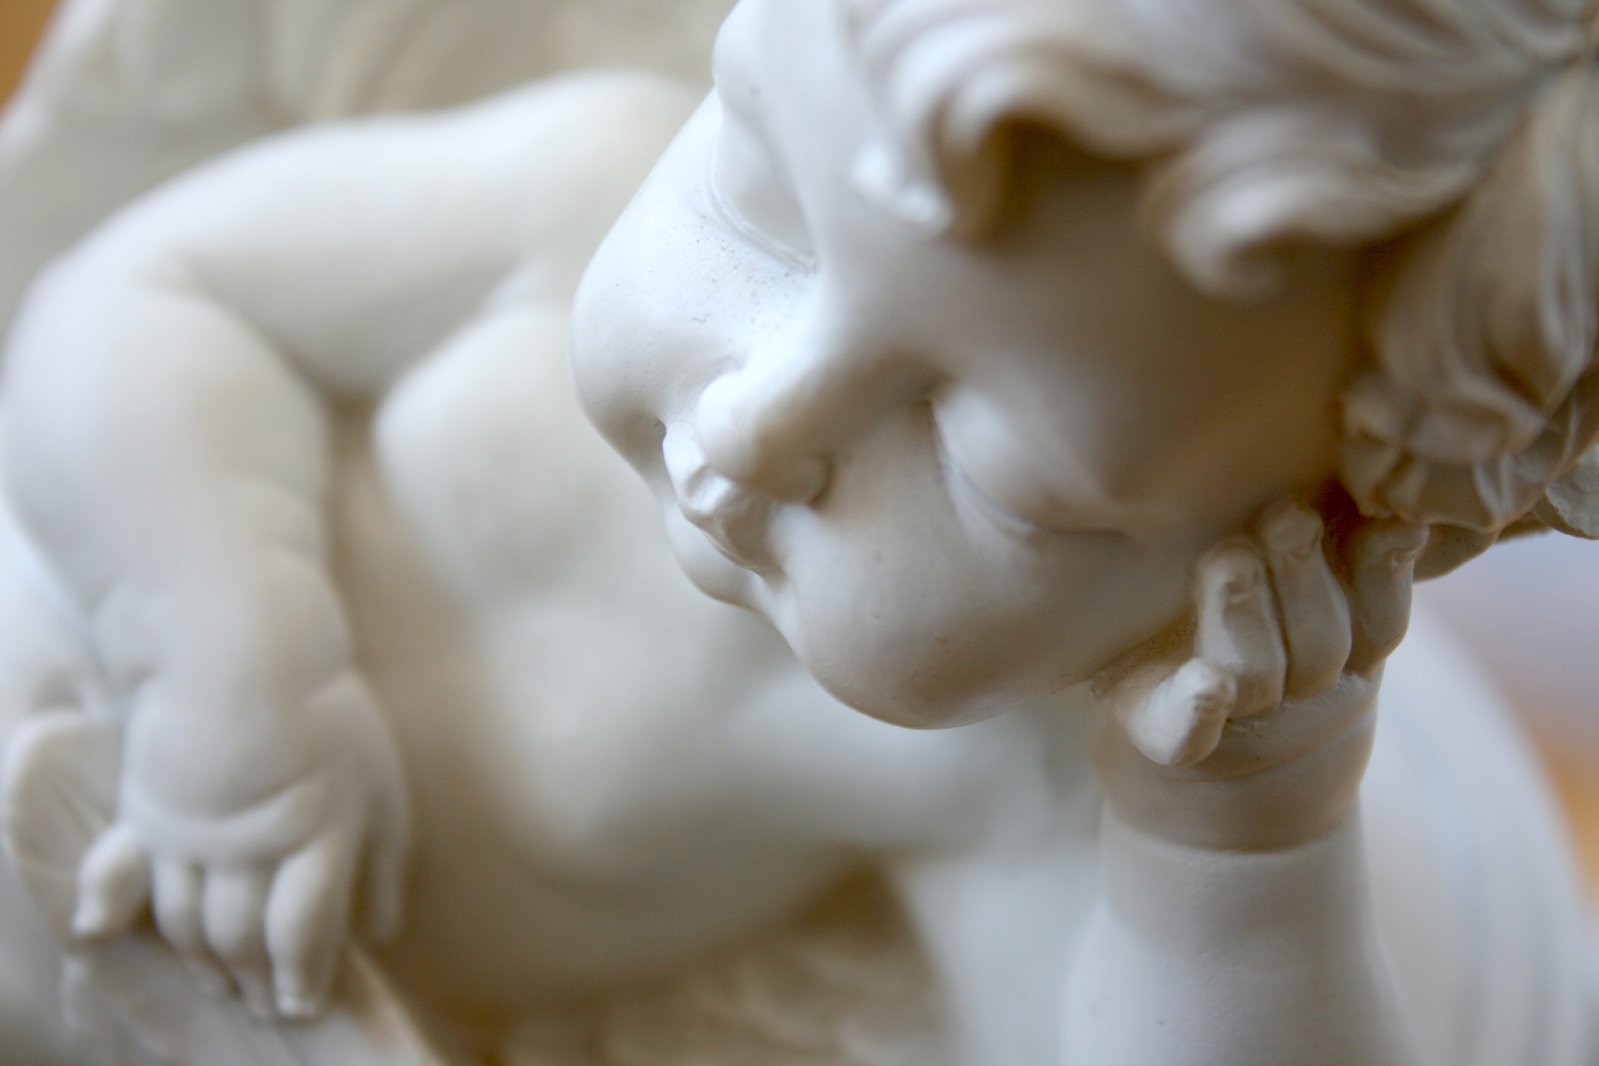 the child's face rests against the edge of a statue